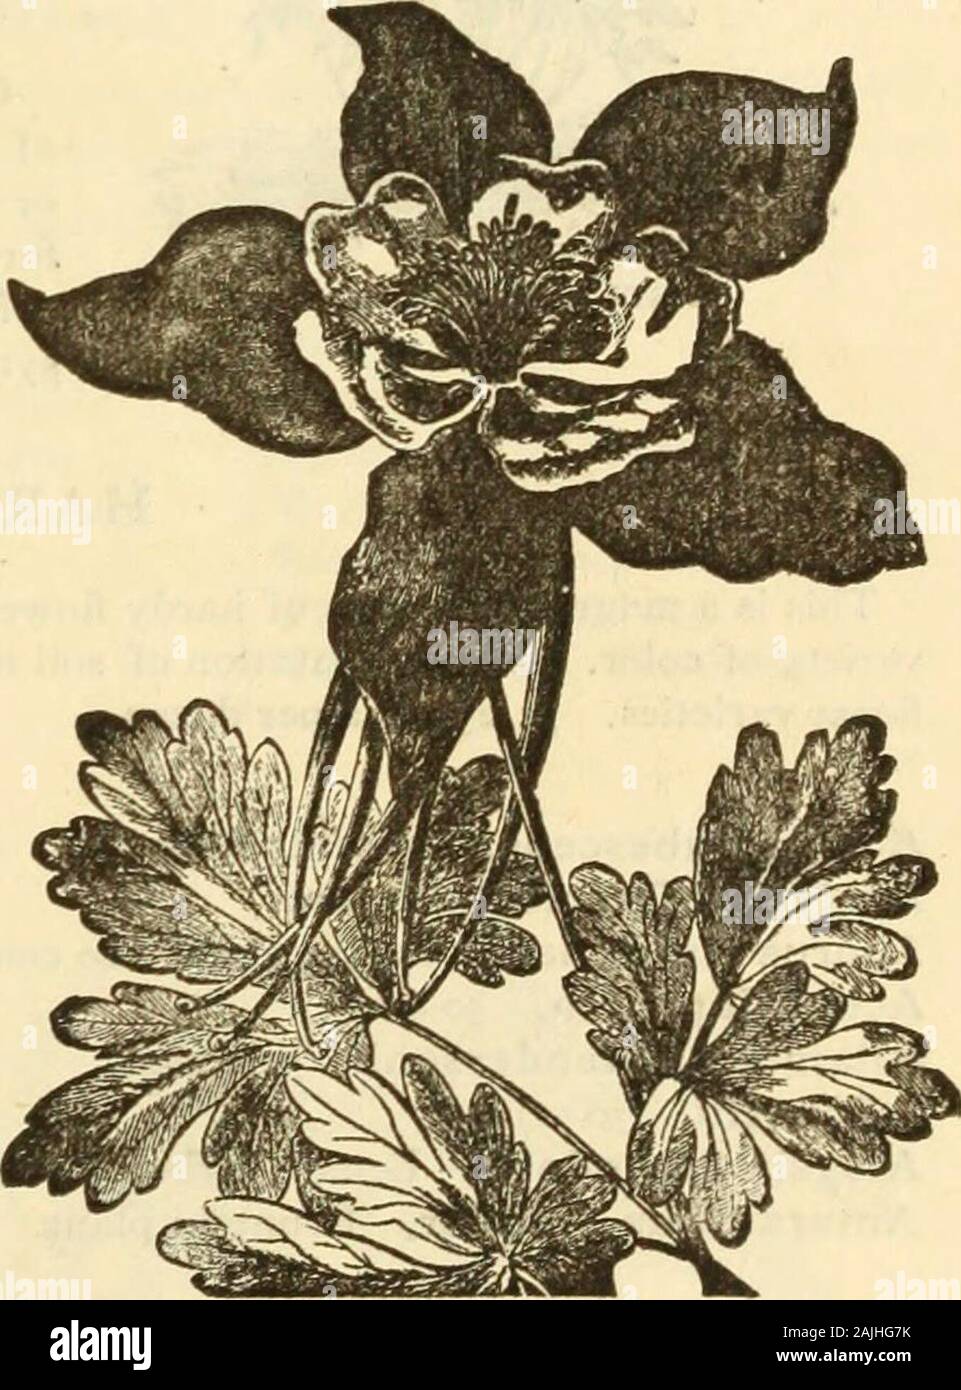 Dreer's garden calendar : 1884 . lumbines, styled the Queen of Columbines. The flowers measurefrom 3 to 3J4 inches in diameter; the outer five petals, as well astie long spurs, are of a beautiful violet blue ; the inner petals arepure white, forming a pleasing contrast. Strong plants. 25 cents ;J2.50 per dozen. AQUILEGIA CHRYSANTHA—New Golden-Spurred Columbine. A splendid hardy perennial from the Rocky Mountains ; flowersrich golden yellow. Strong plants, 25 cents ; $2.50 per dozen. ARDISIA CRENULATA. A very ornamental green-house plant, with dark evergreenfoliage, producing clusters of brilli Stock Photo